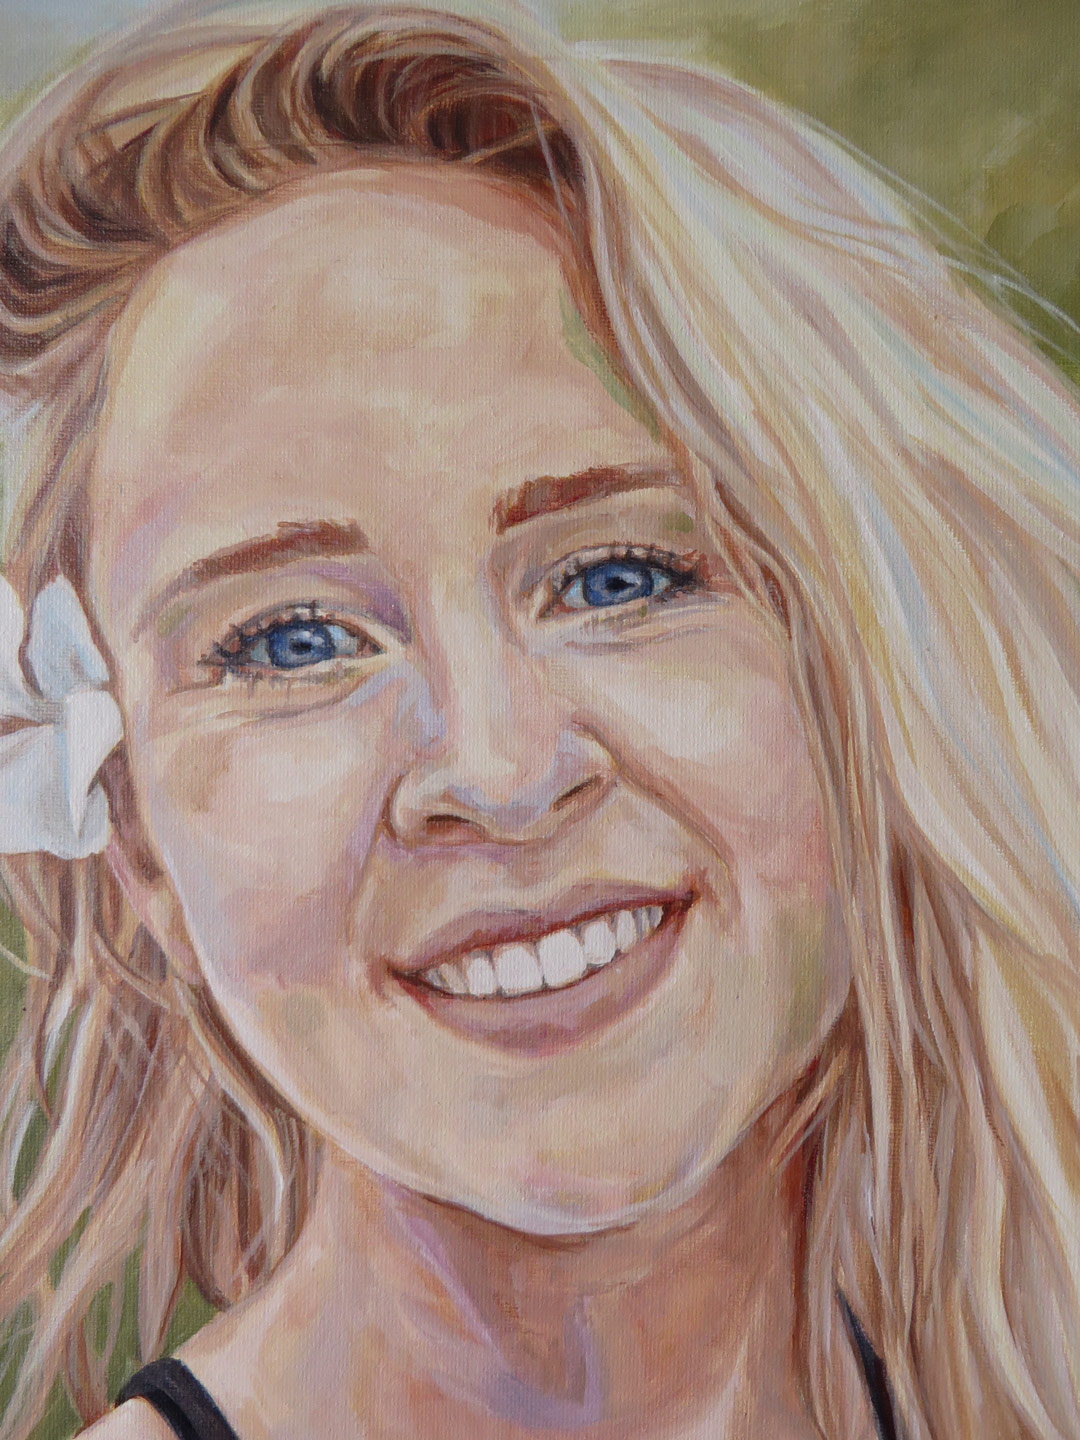 acrylic painting of a young woman smiling